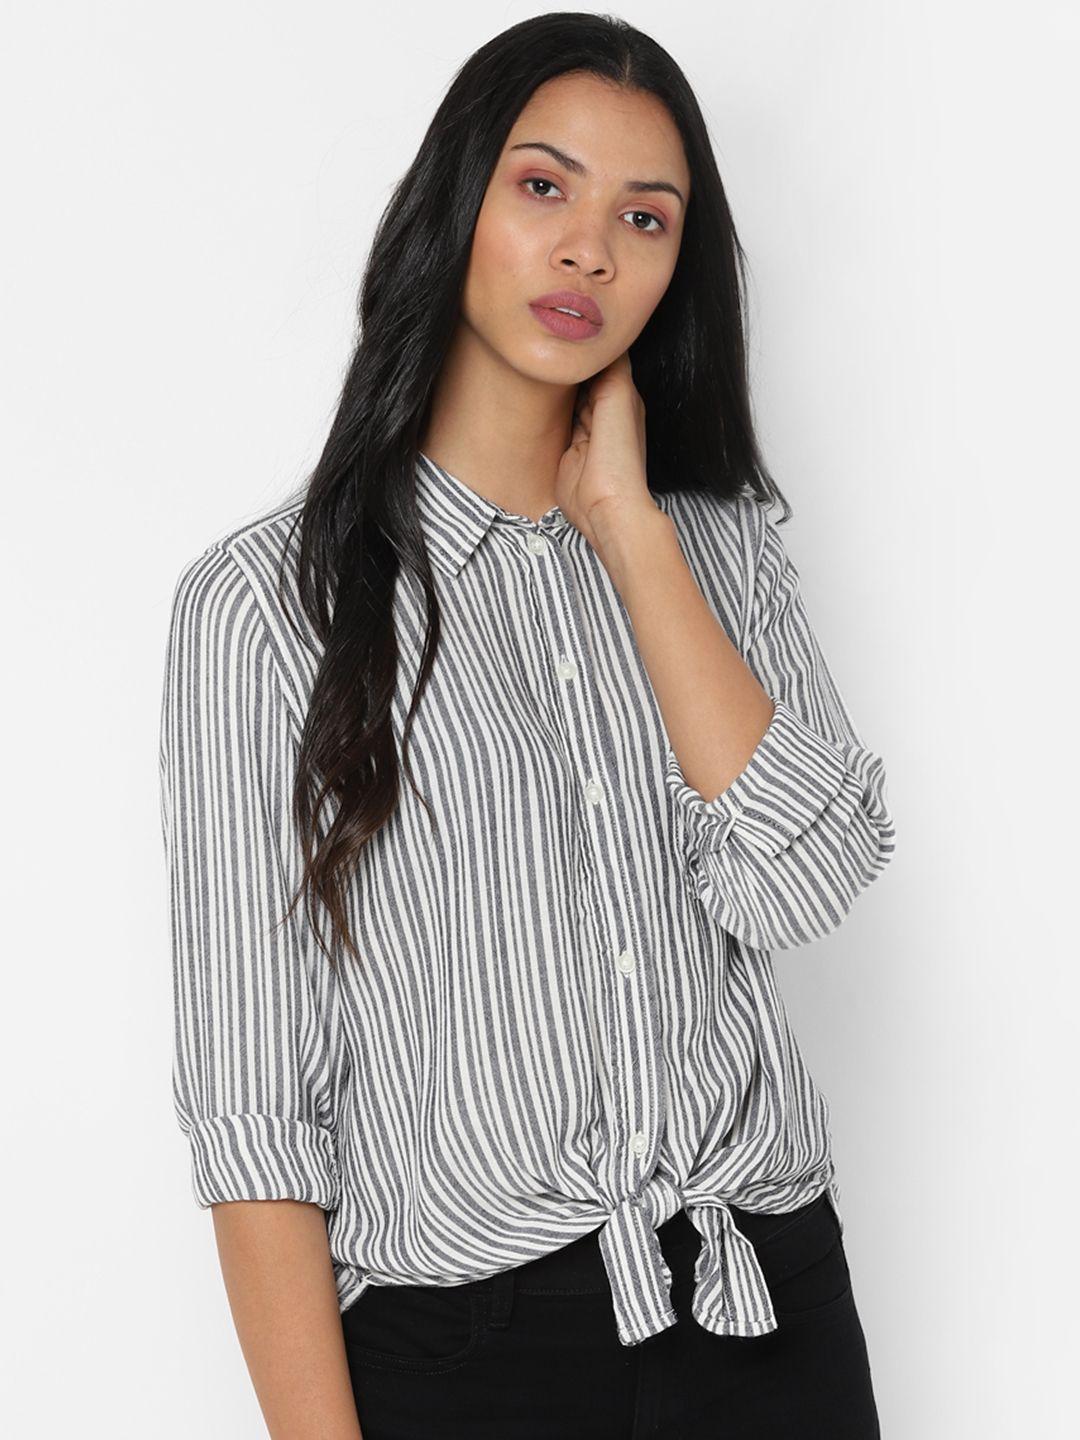 american eagle outfitters women black & white striped casual shirt